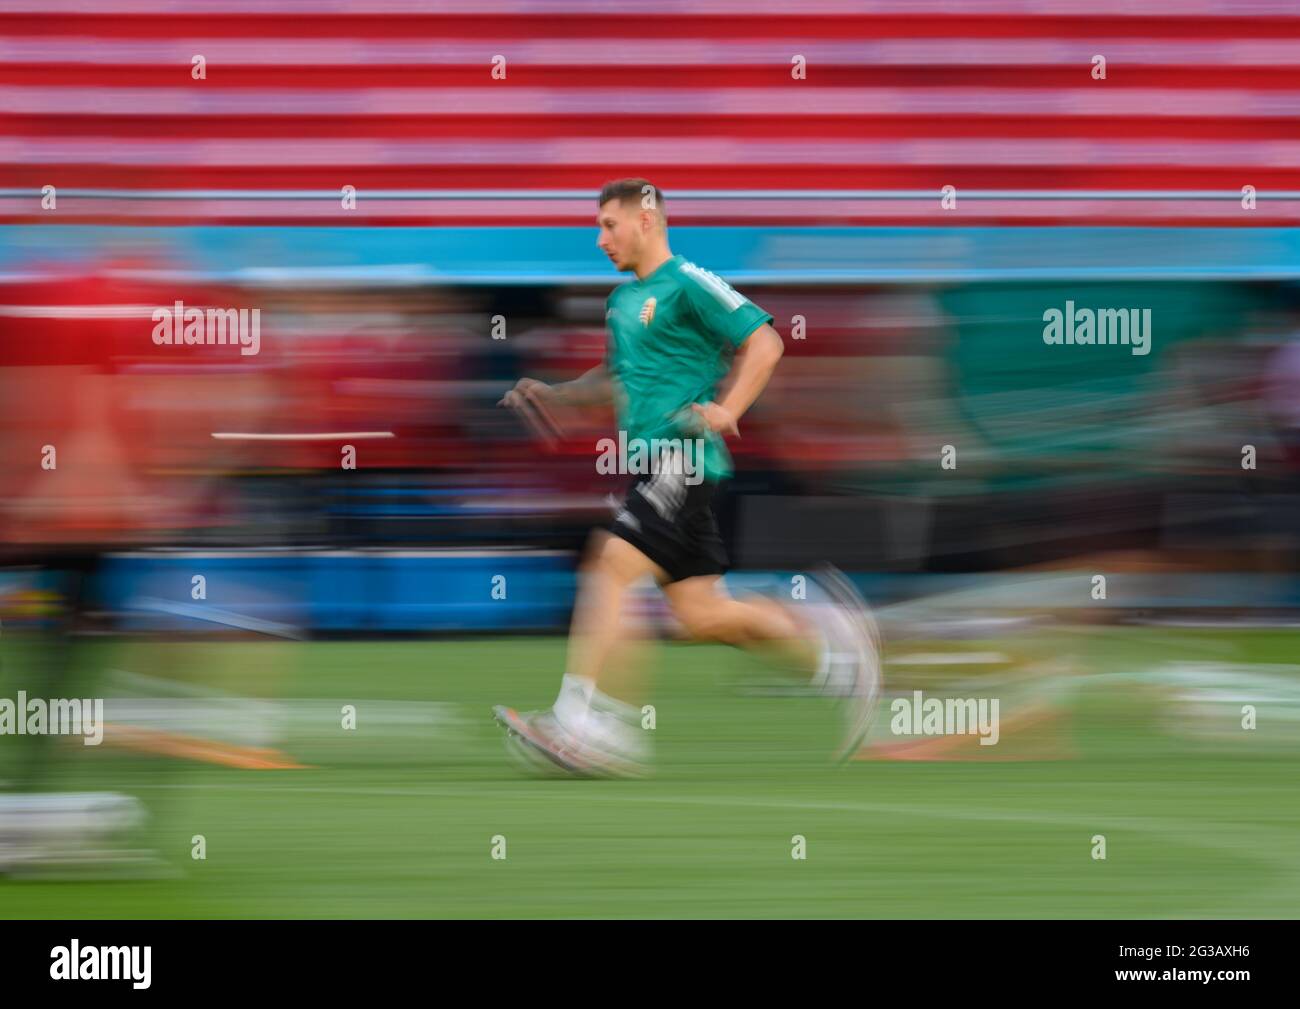 Budapest, Hungary. 14th June, 2021. Football: European Championship, Group F, before the match Hungary - Portugal, final training of Hungary in the Puskas Arena. Willi Orban runs across the field. (Shot with long exposure time) Credit: Robert Michael/dpa-Zentralbild/dpa/Alamy Live News Stock Photo